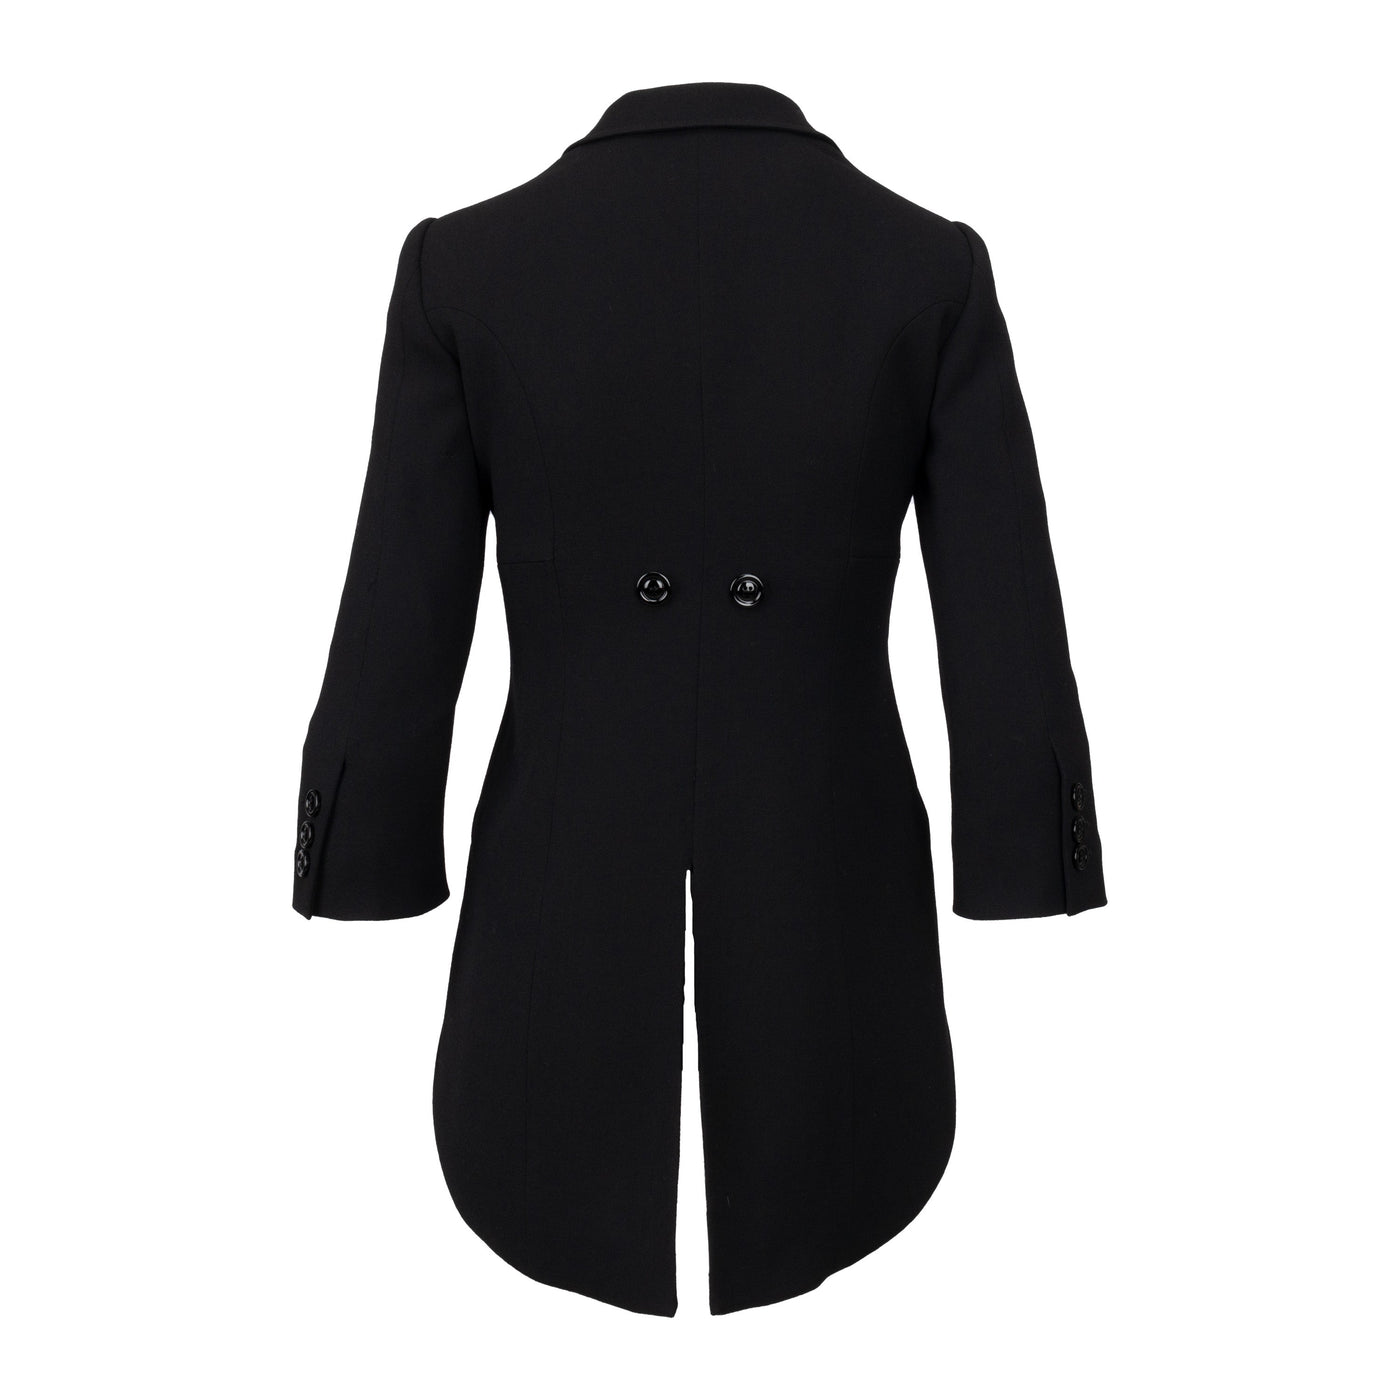 Secondhand Moschino Cheap and Chic Cropped Tailcoat 